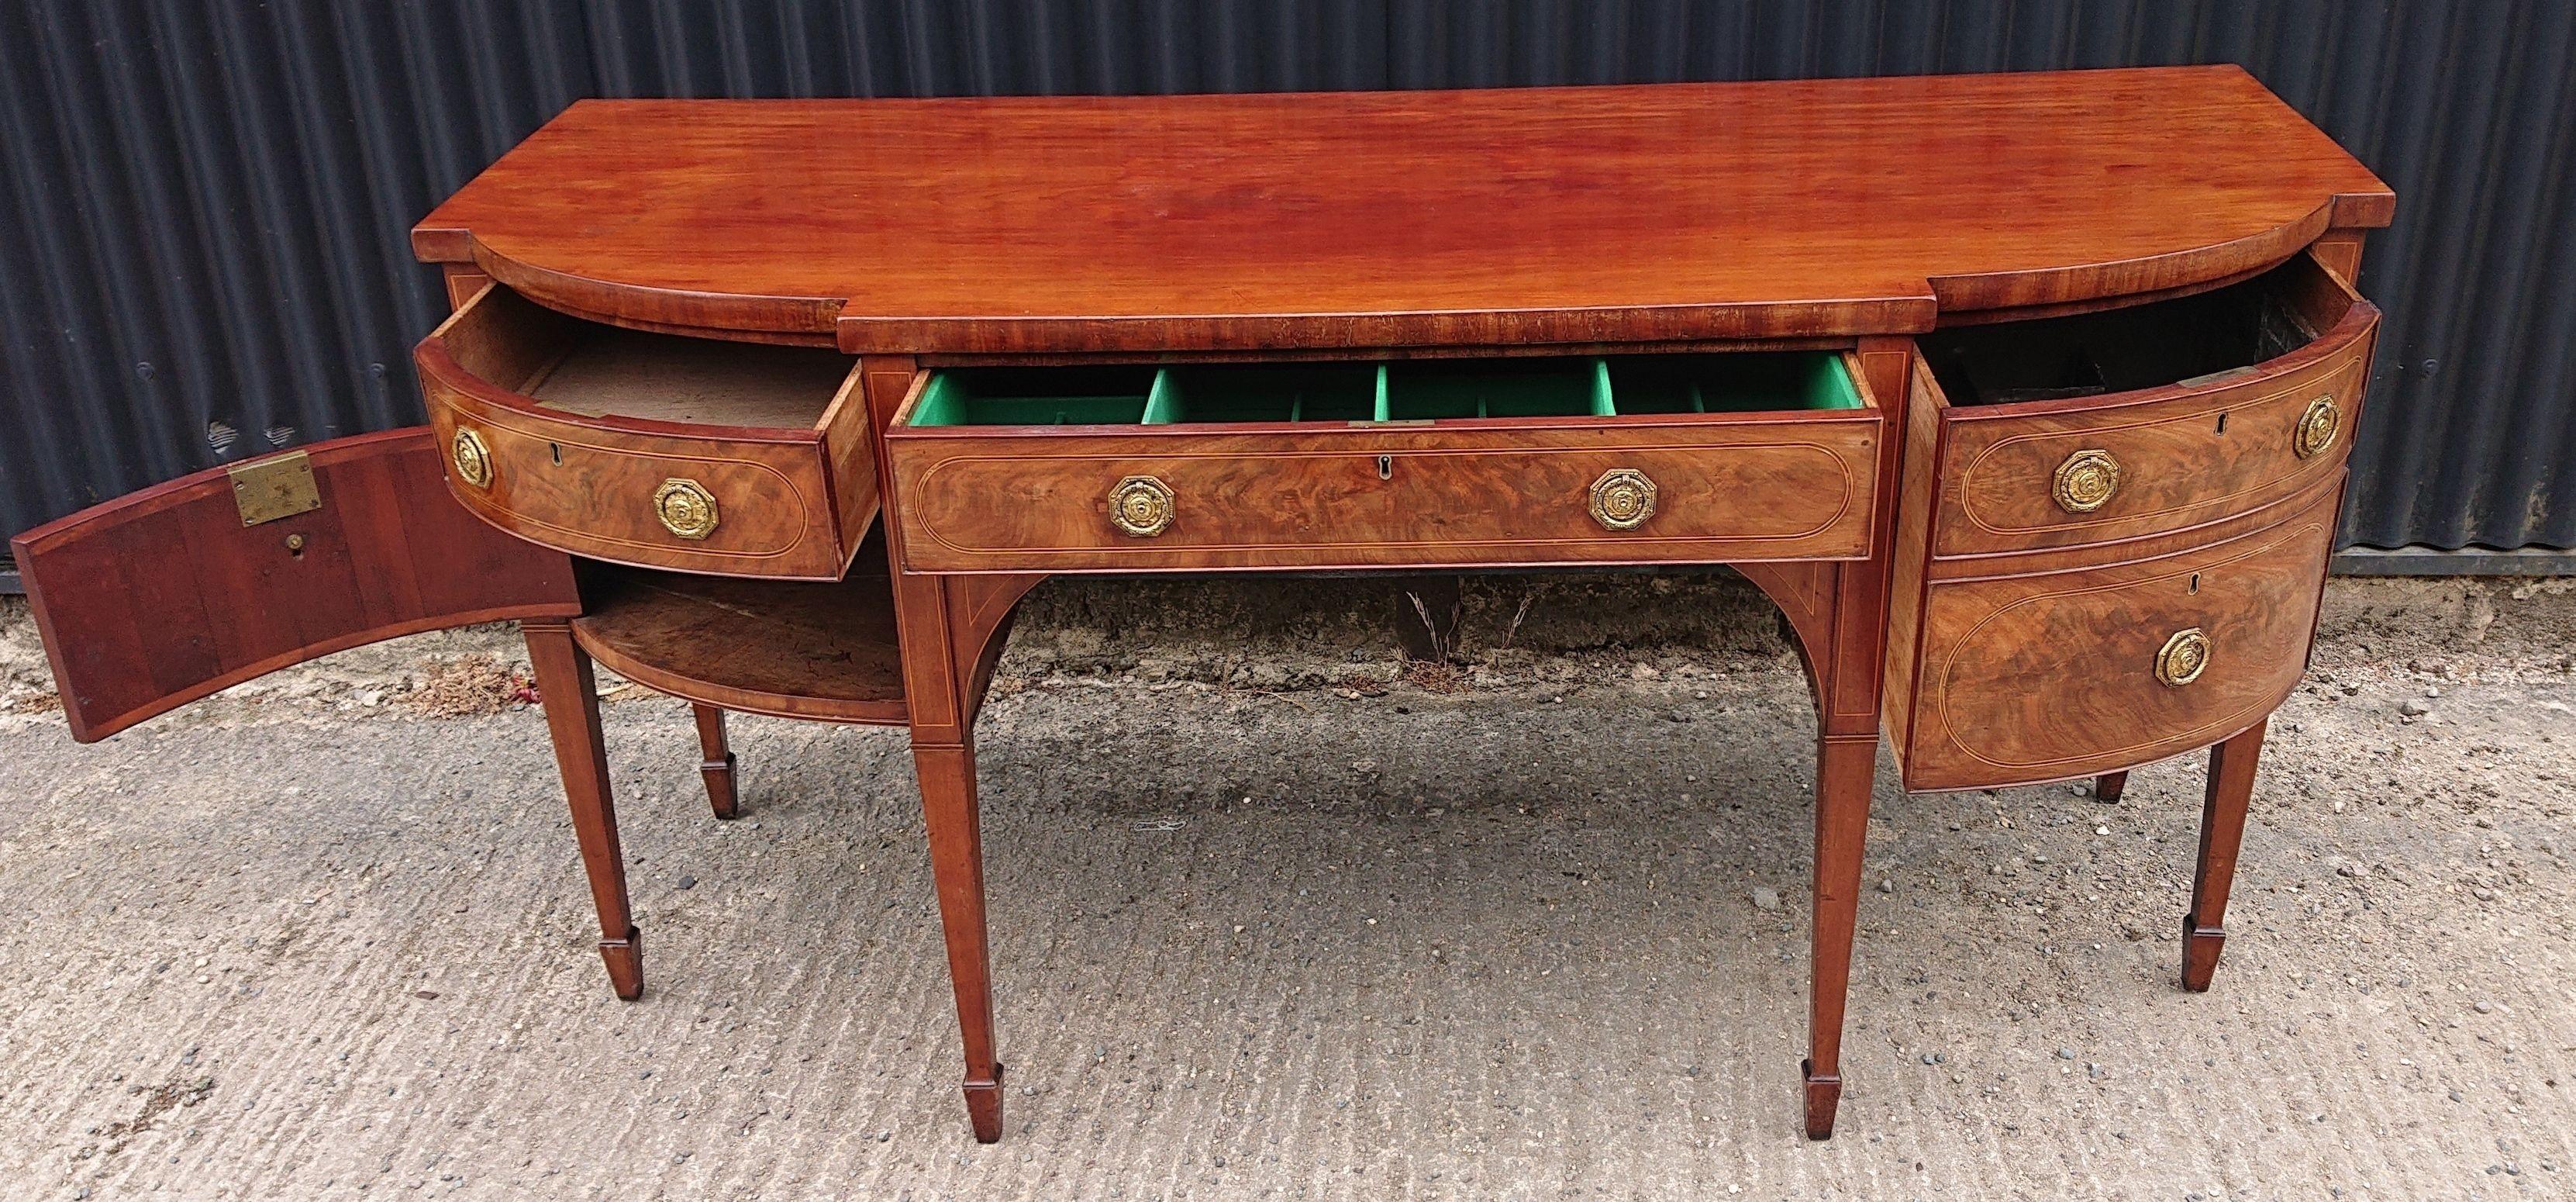 Antique Sideboard George III Period Mahogany For Sale 4